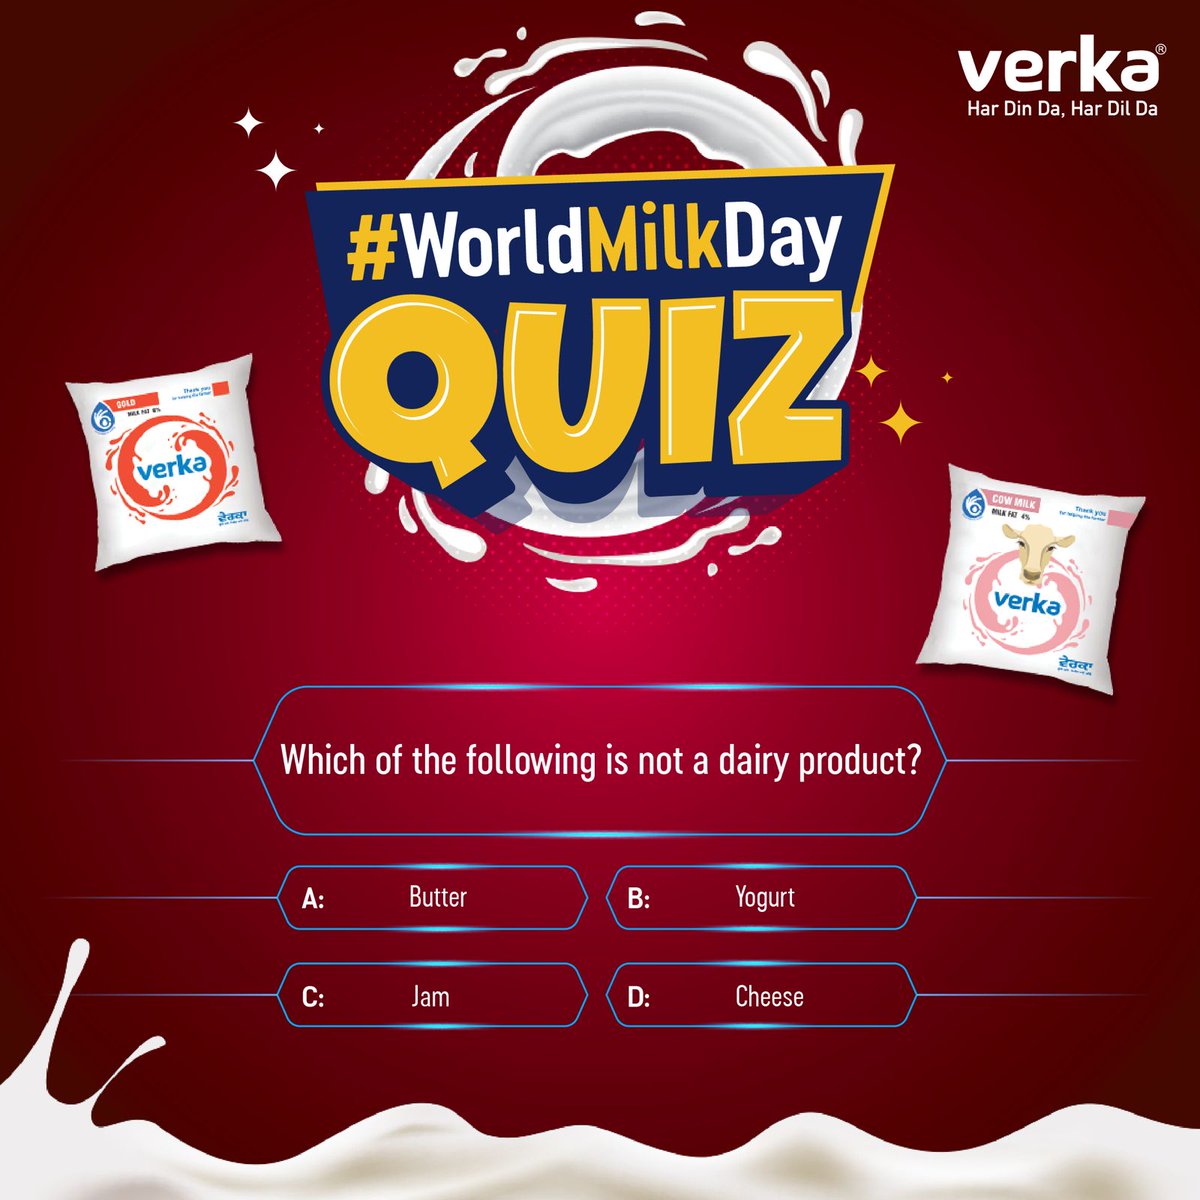 #Quiz Time! Get ready to win exciting prizes! Join the #WorldMilkDay Quiz by #Verka and show off your knowledge! Comment your answer below. Don't forget to follow the below terms & conditions in order to be eligible for the contest!